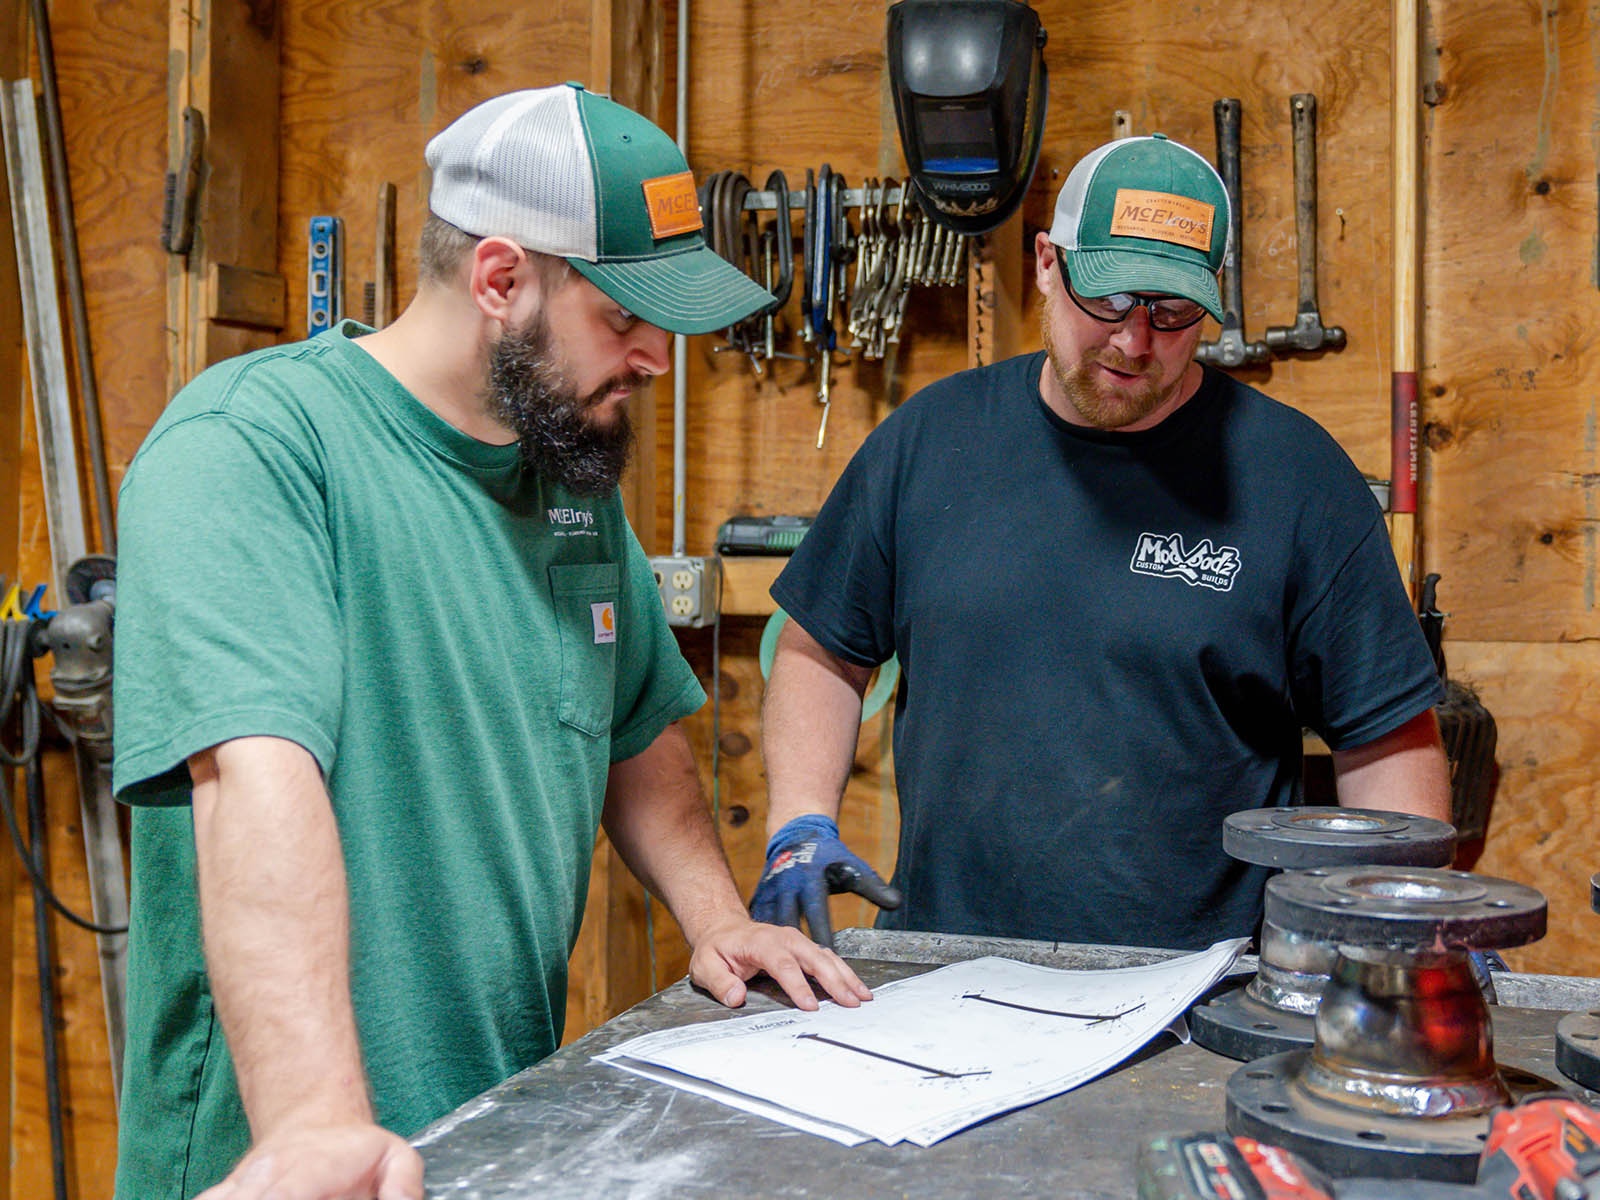 Joey Towle and Chris Morgan, McElroy’s plumber/pipefitter, review piping designs for fabrication in the McElroy’s shop.